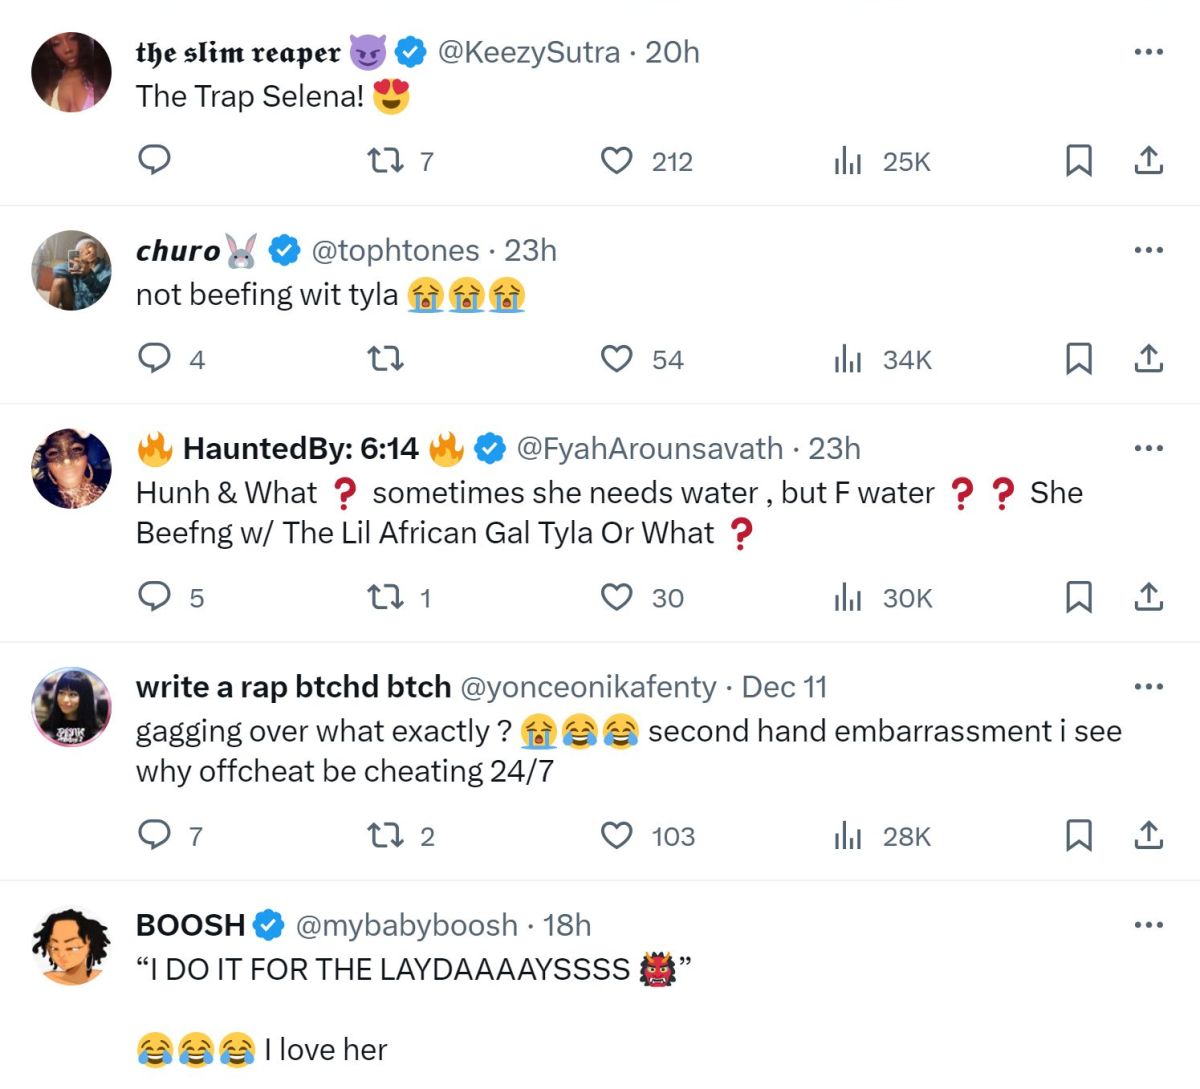 Cardi B'S Alleged Shade At Tyla: A Stir In The Music World 3